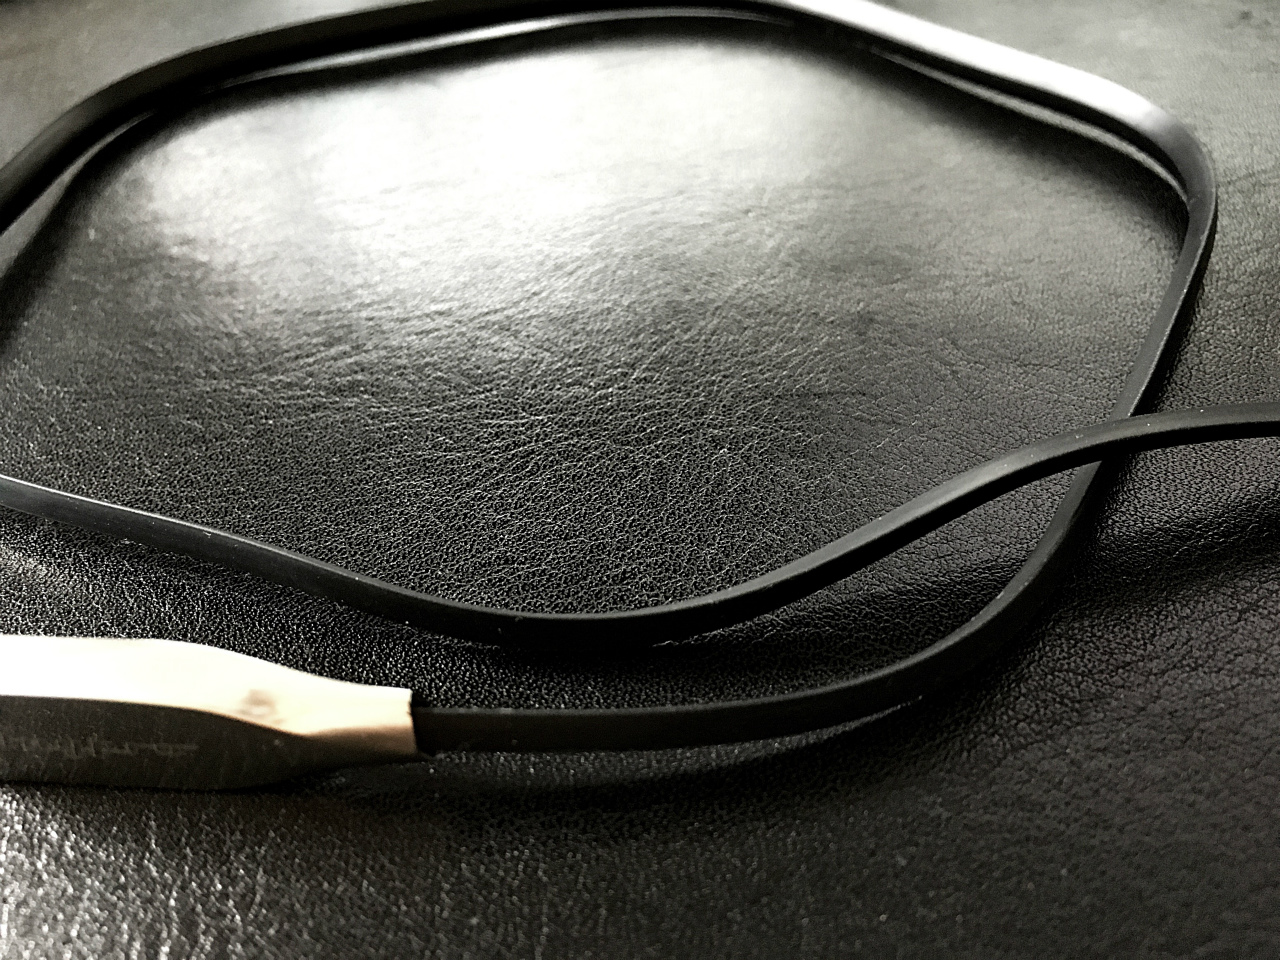 pr-anypro-microusb-cable-06